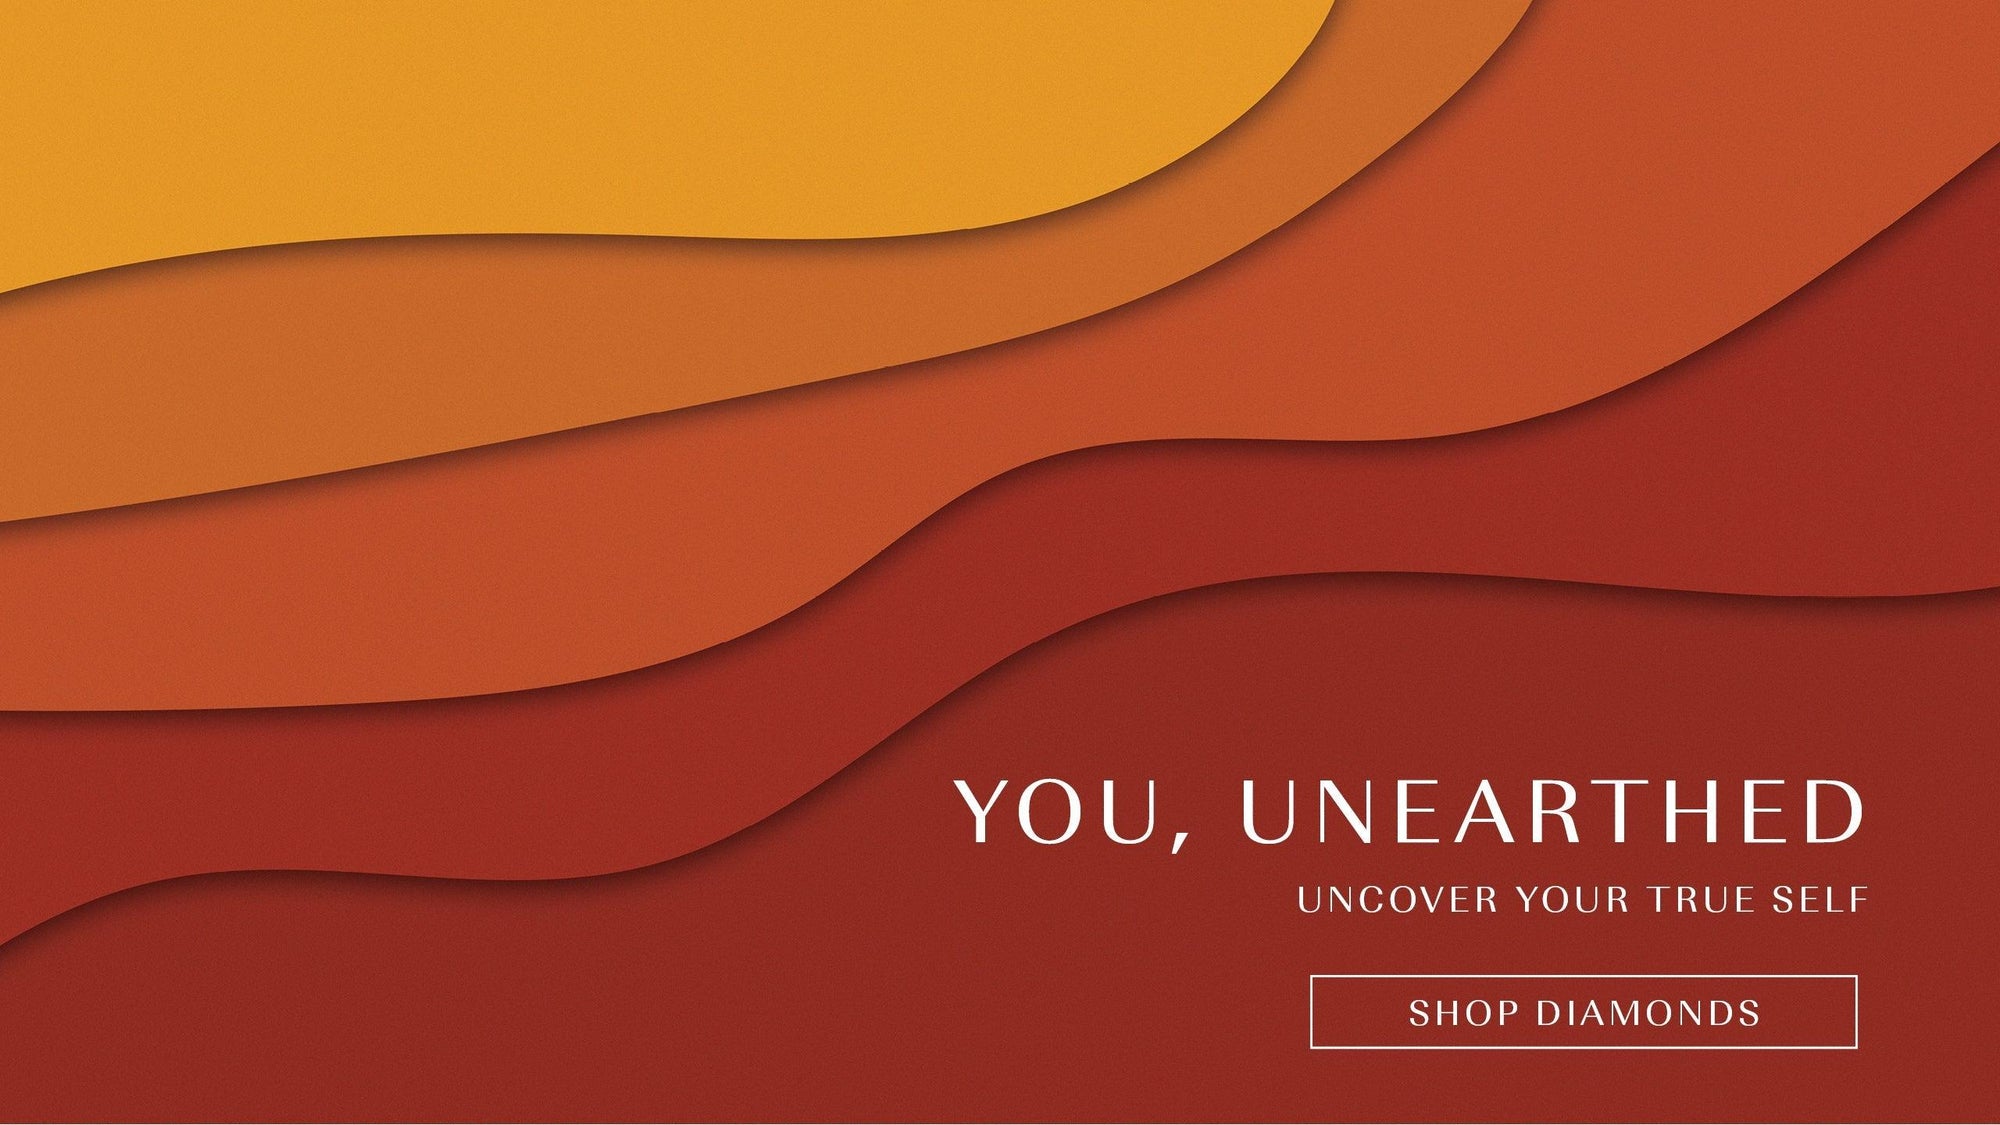 Diamond Sale - You, Unearthed - Wallace Bishop